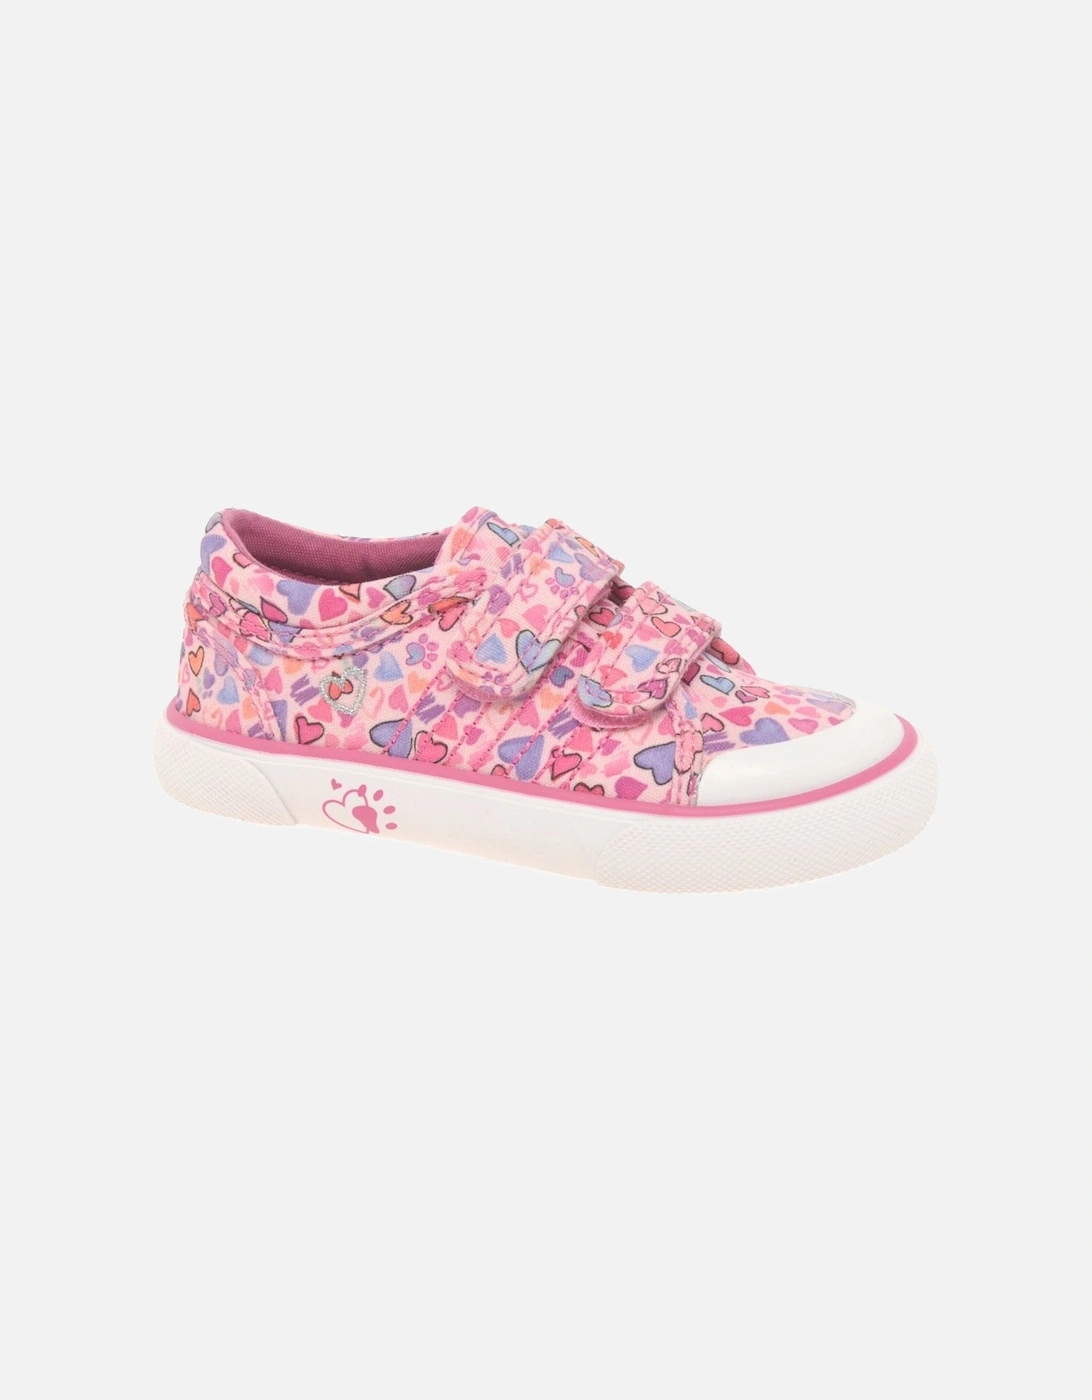 Loveheart Girls Infant Canvas Shoes, 6 of 5